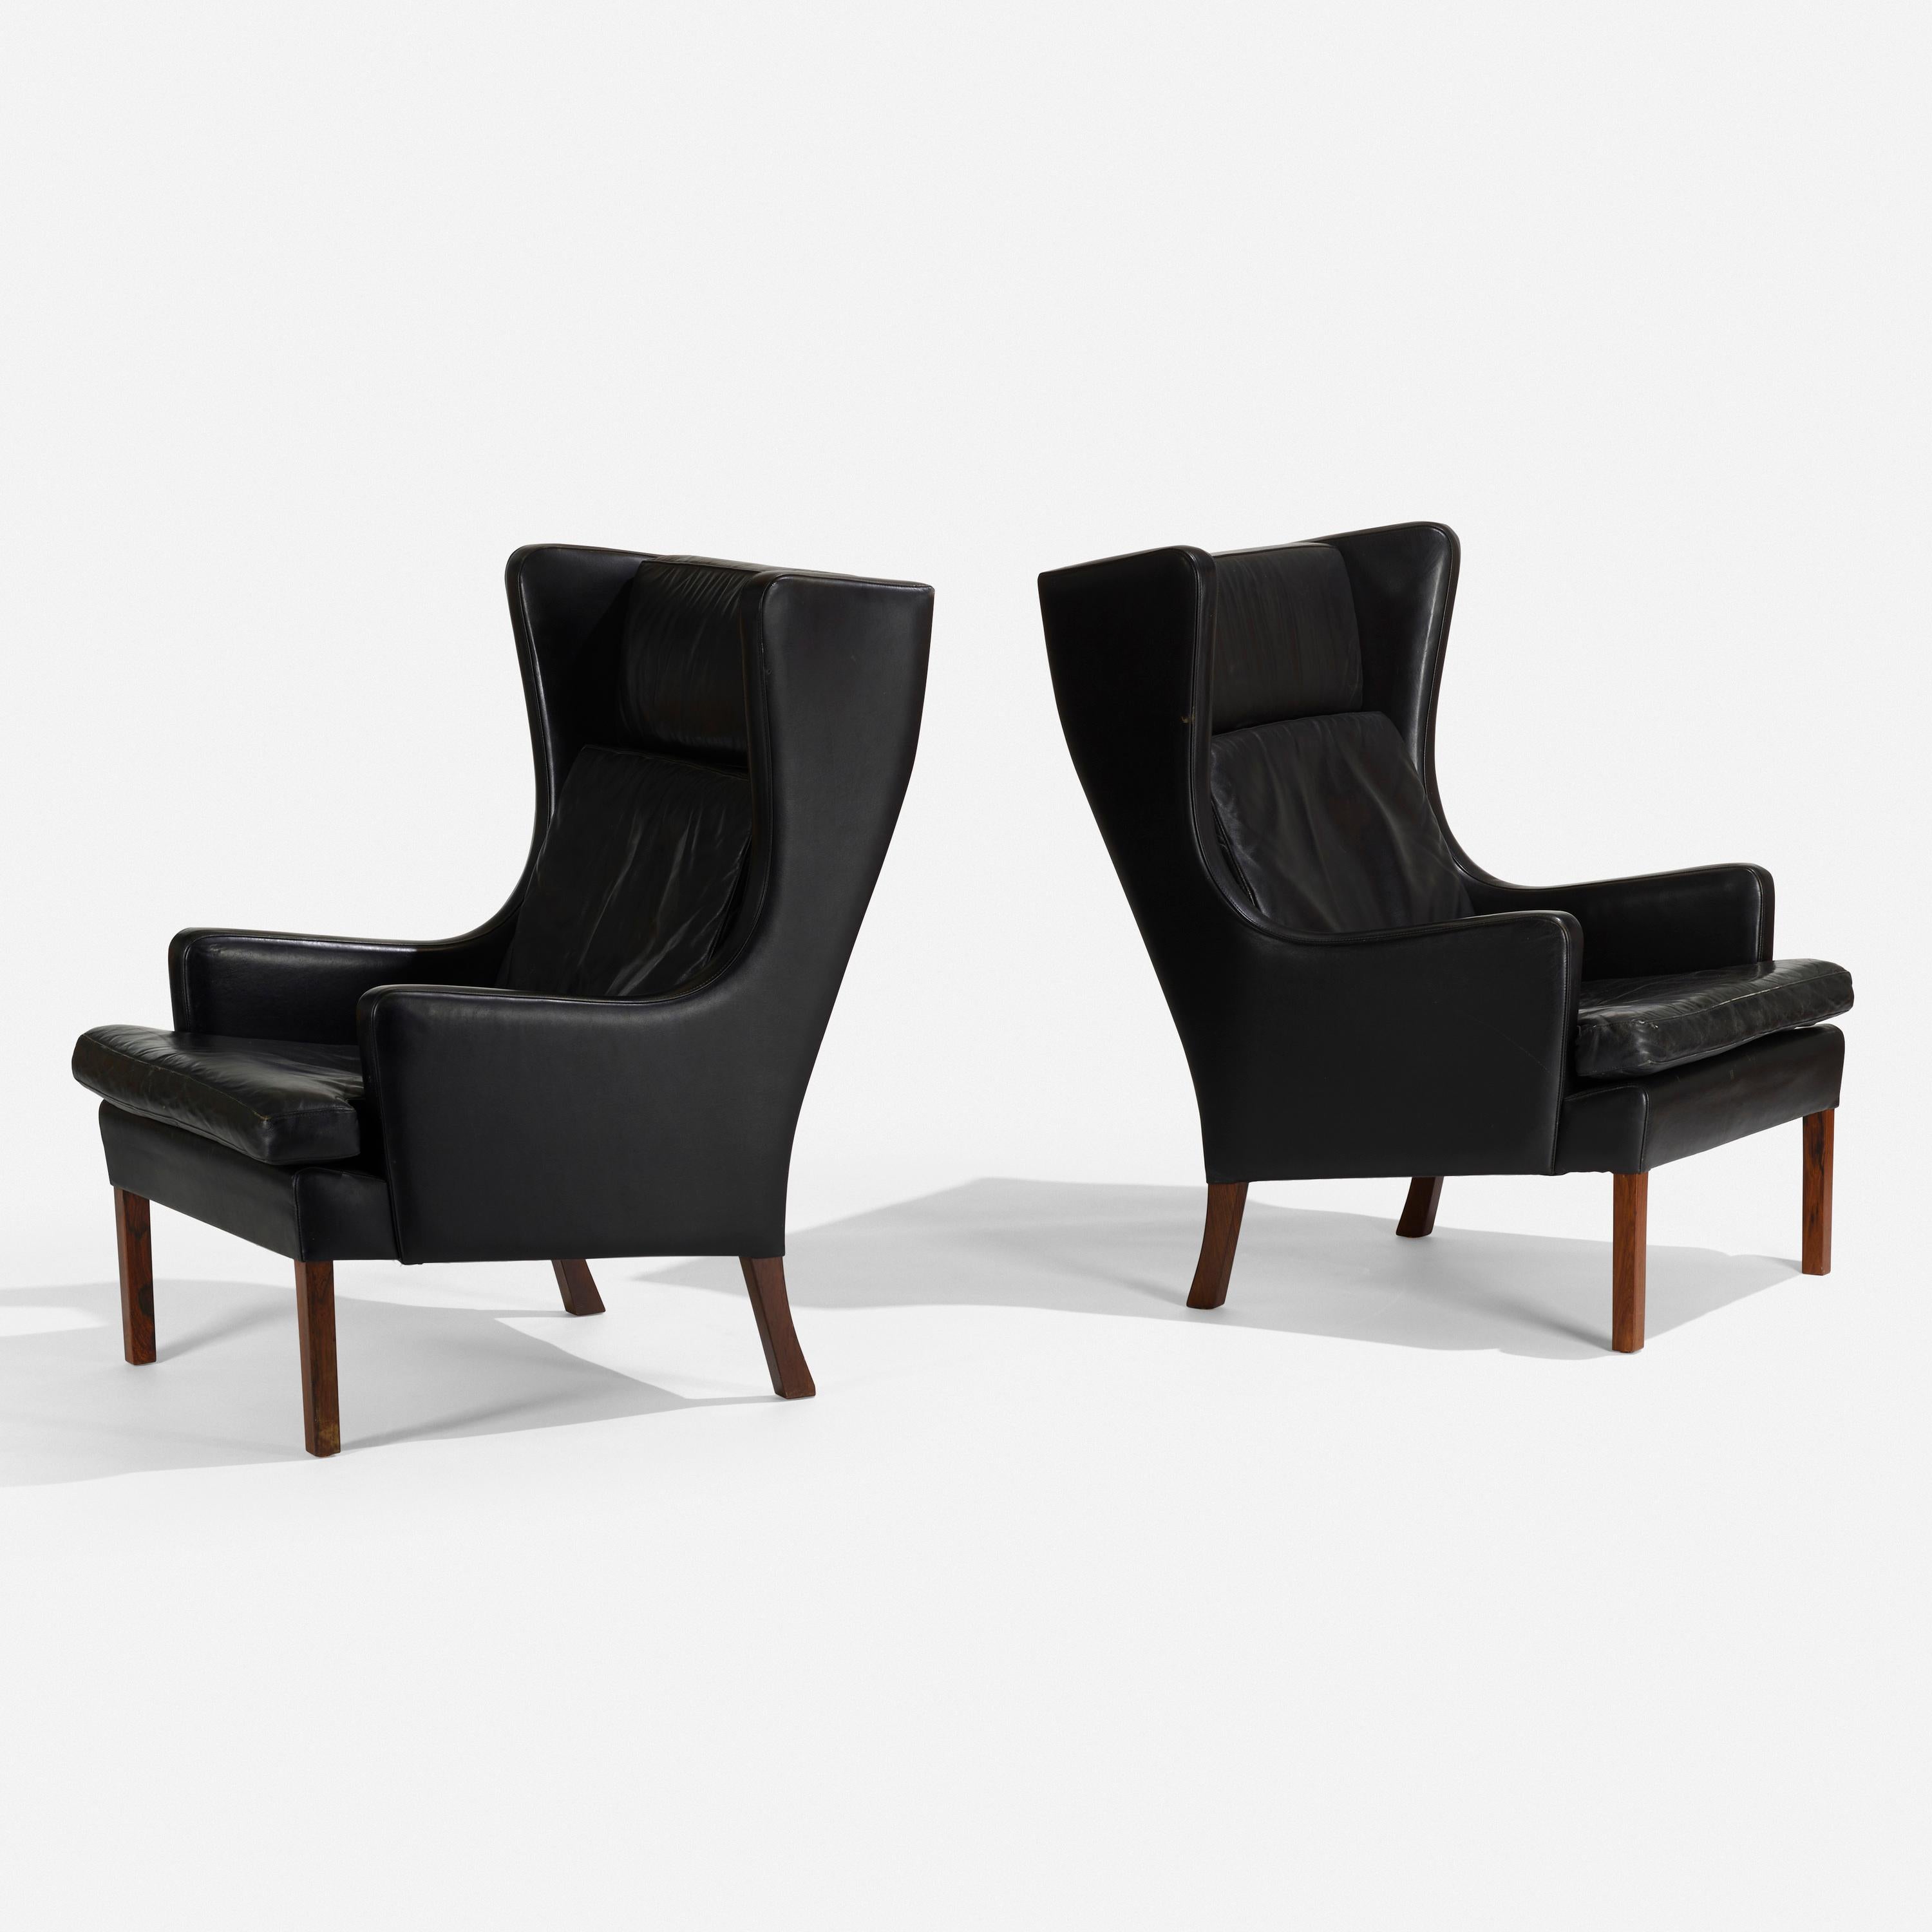 Pair of Danish black leather upholstered wingback chairs.